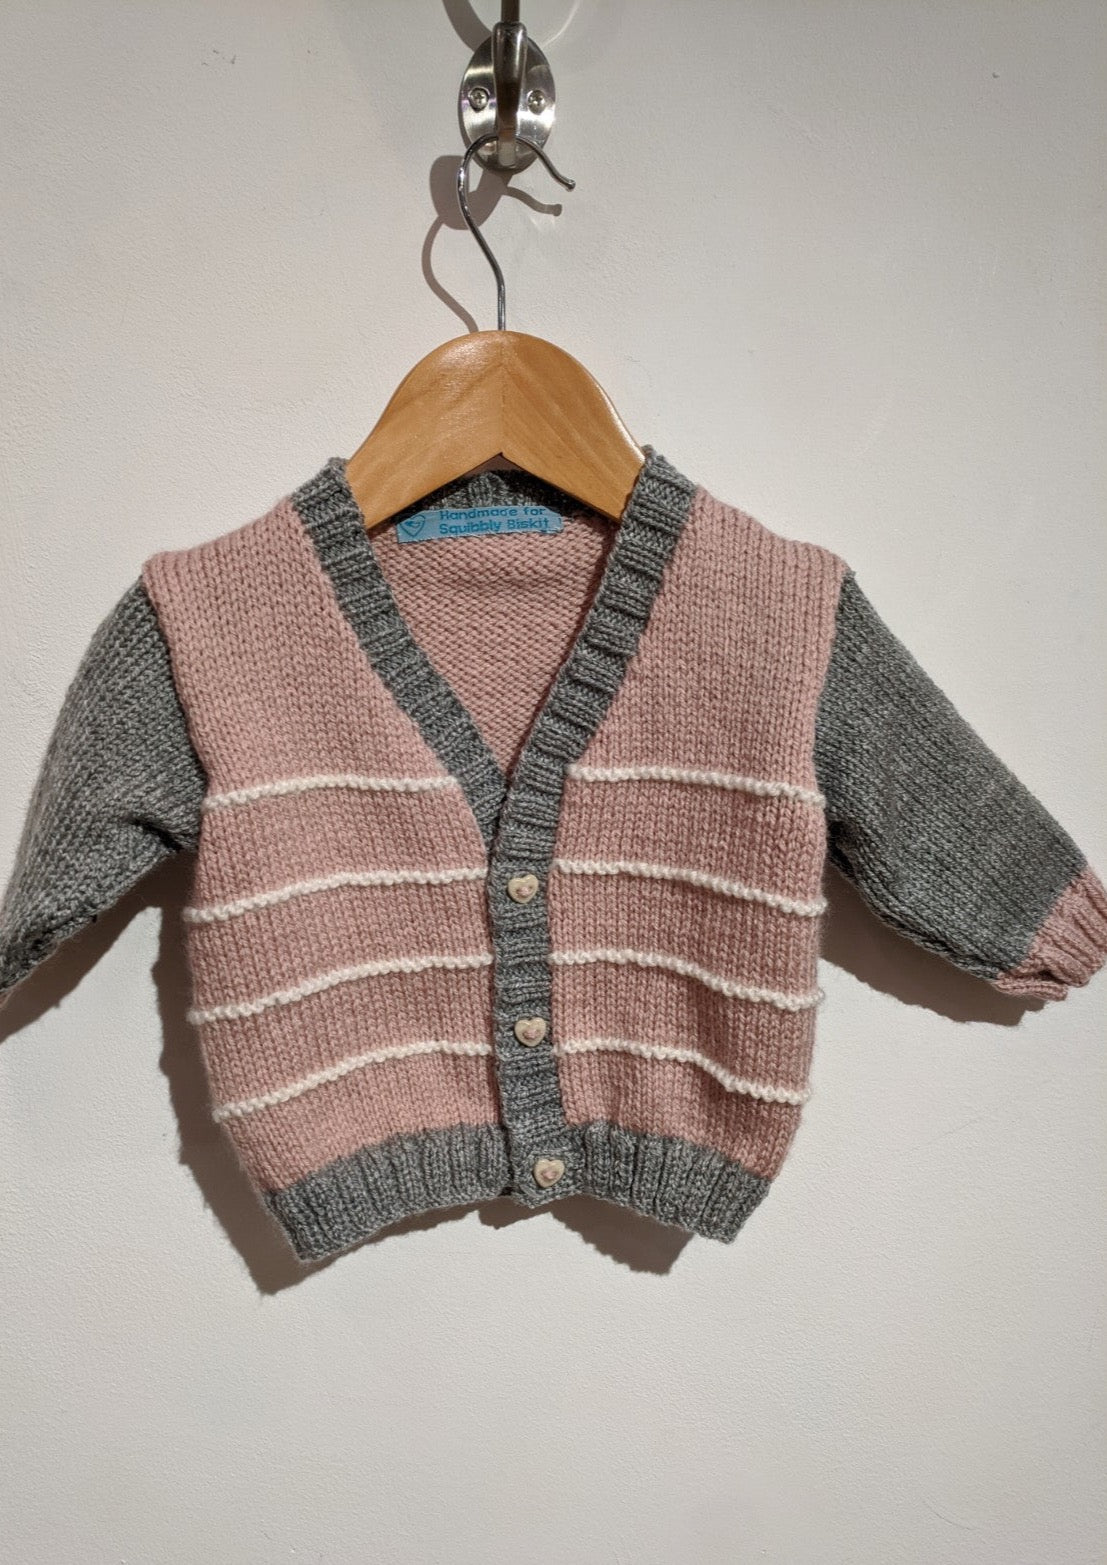 Hand knitted cardigan